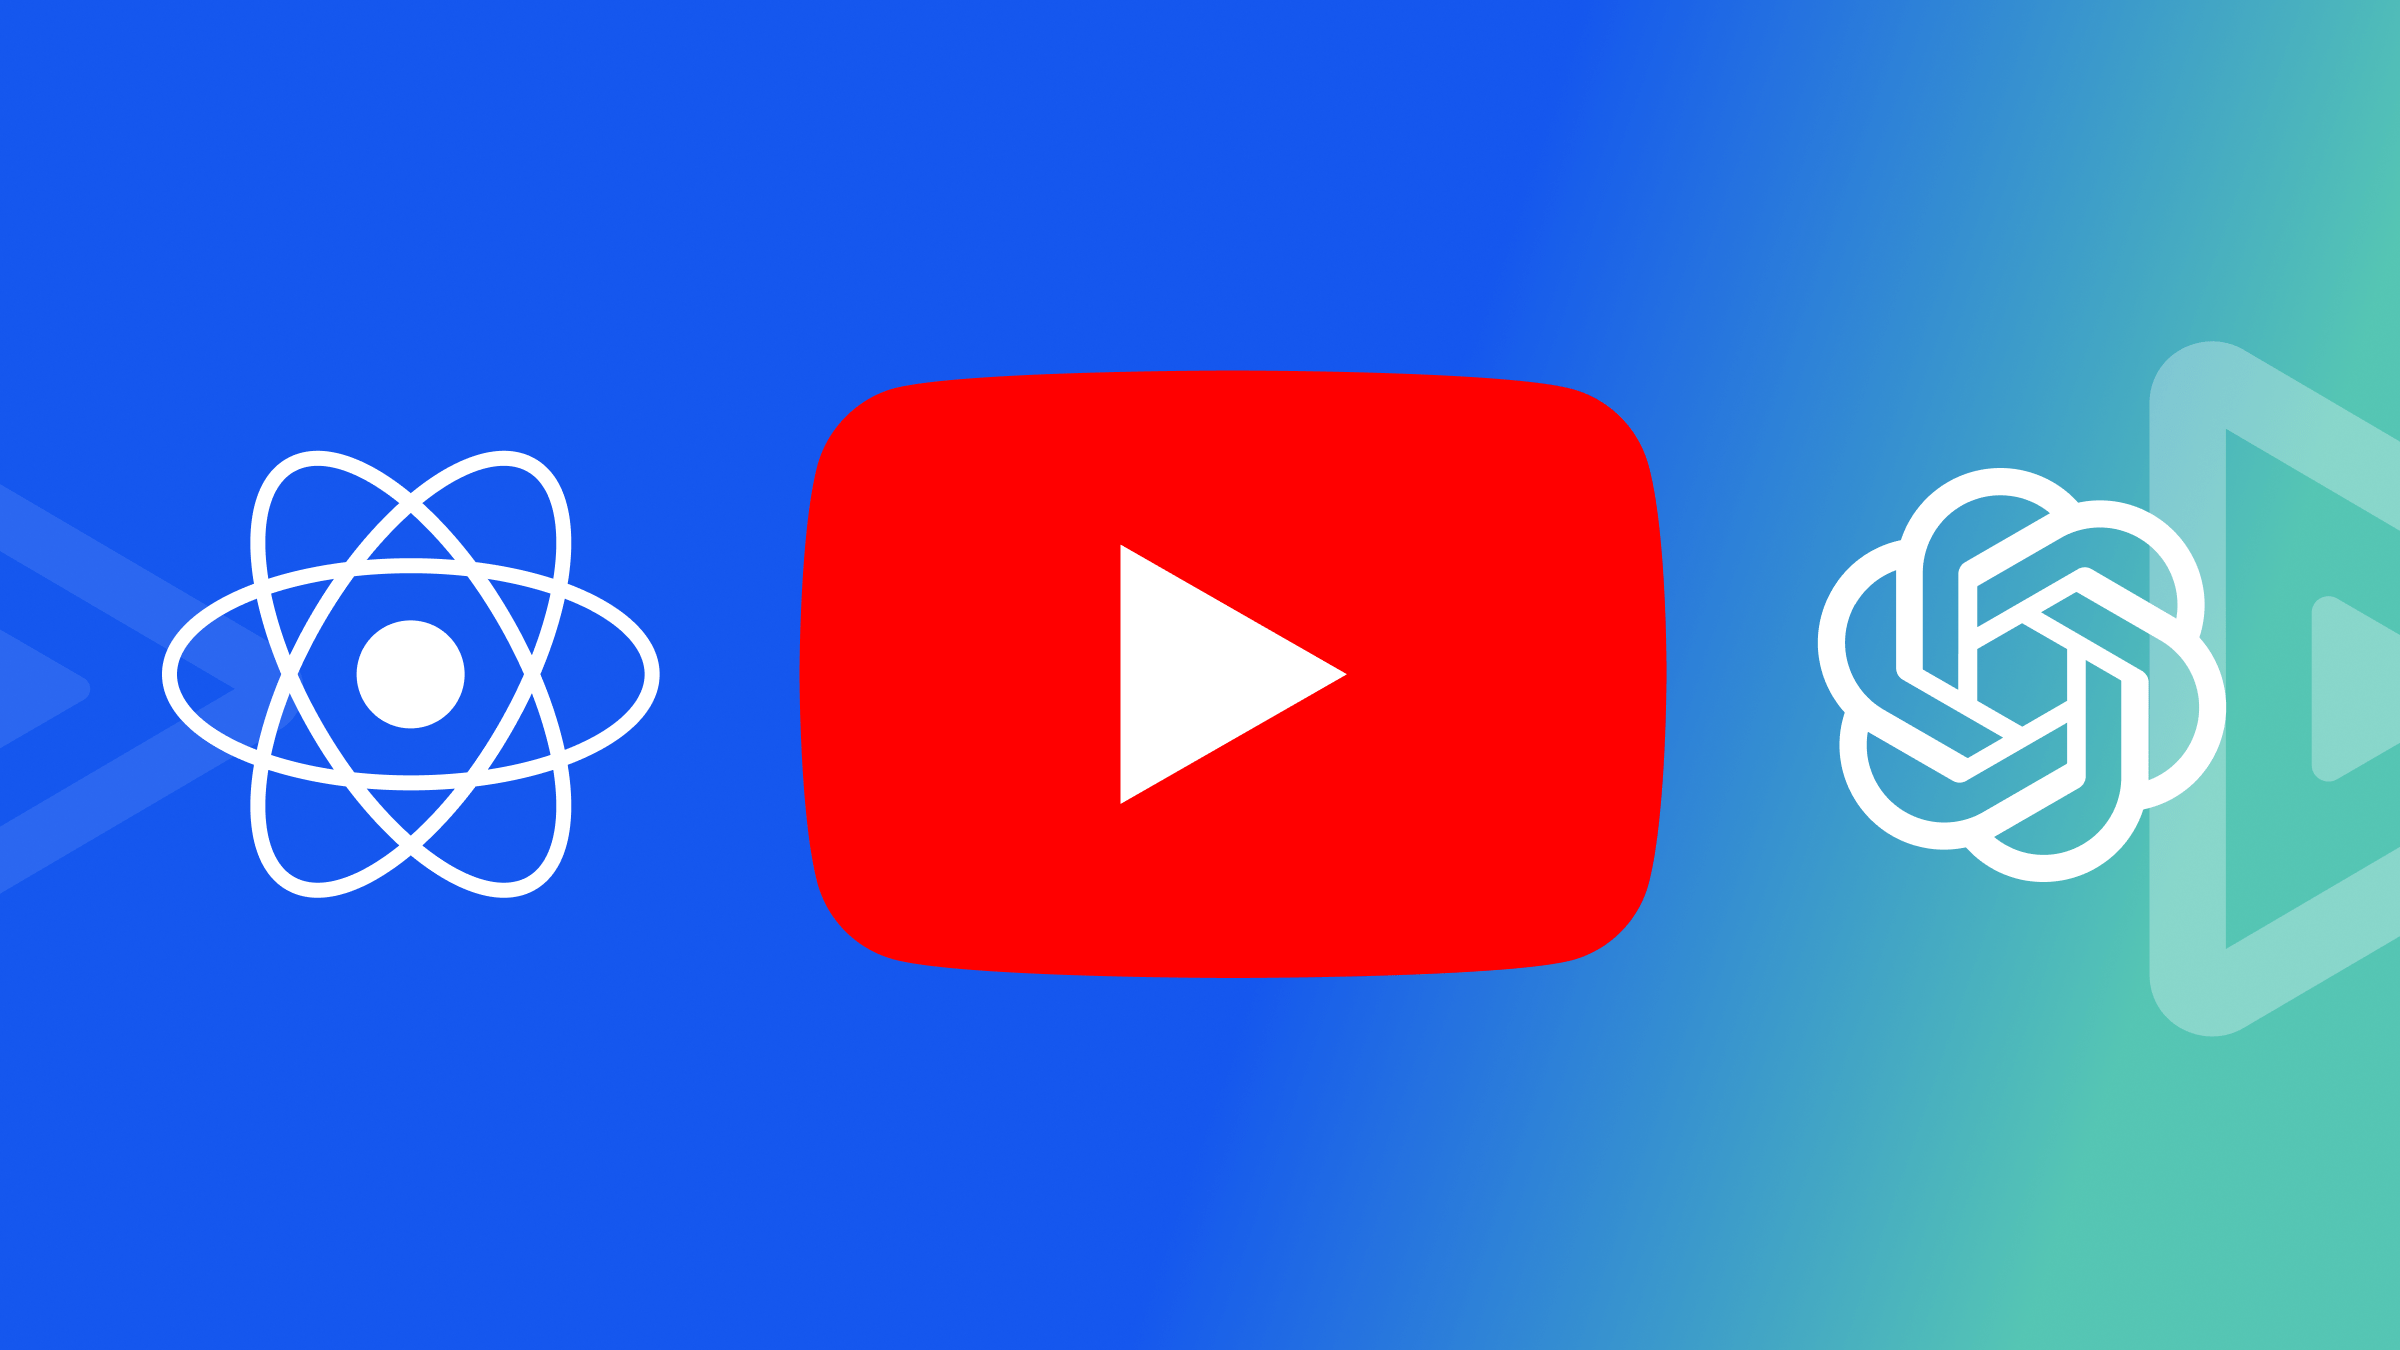 Using AI to build a YouTube Video Summarizer